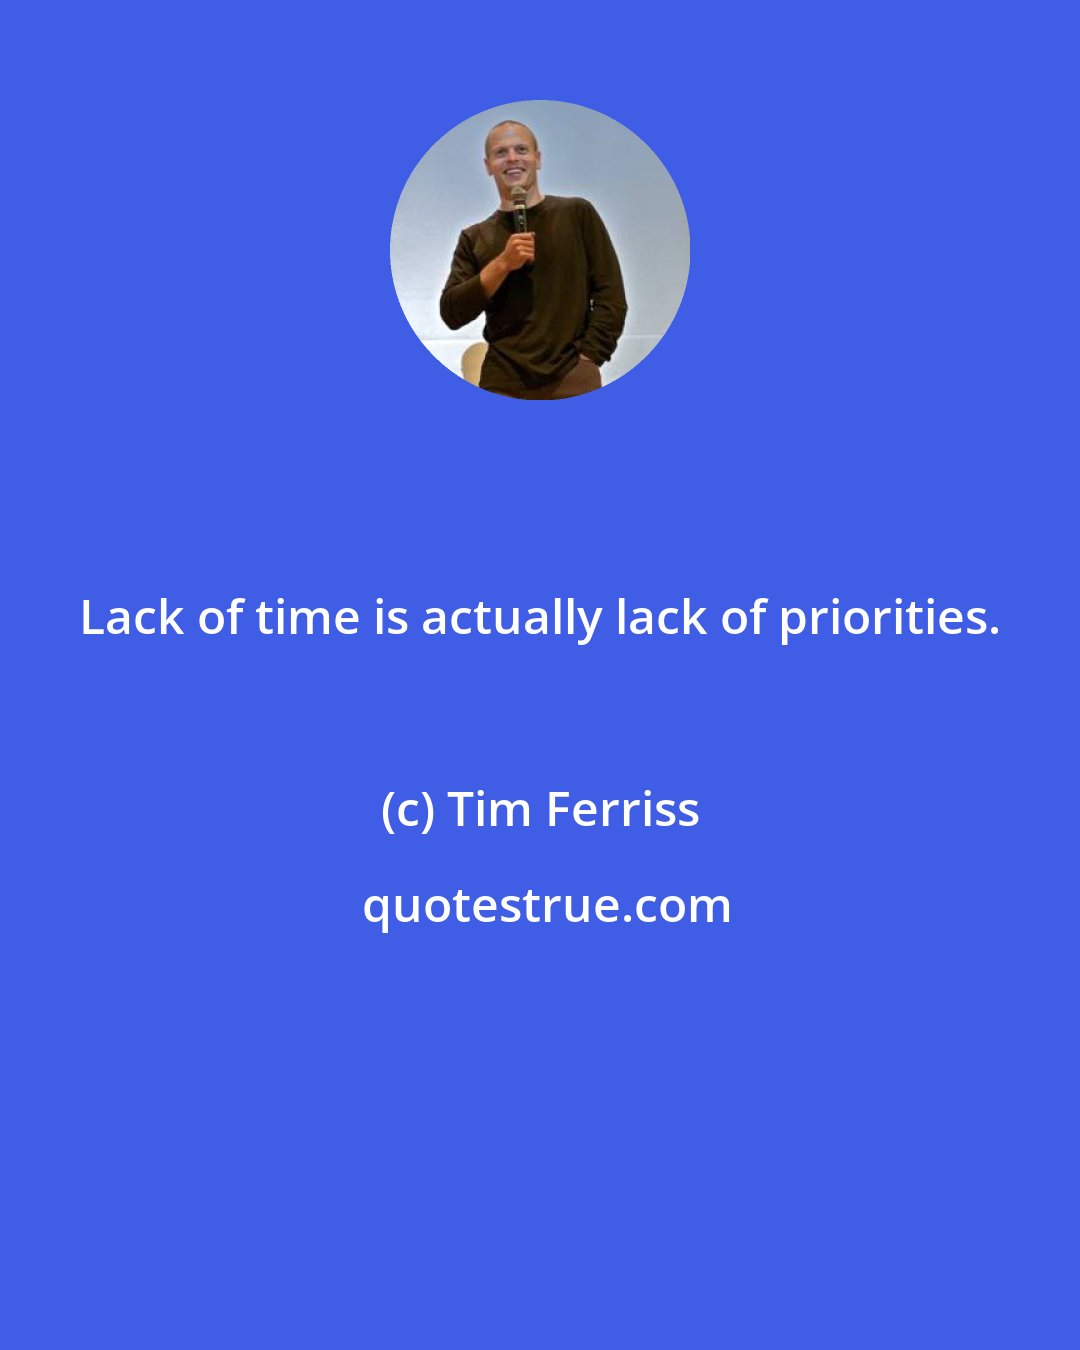 Tim Ferriss: Lack of time is actually lack of priorities.